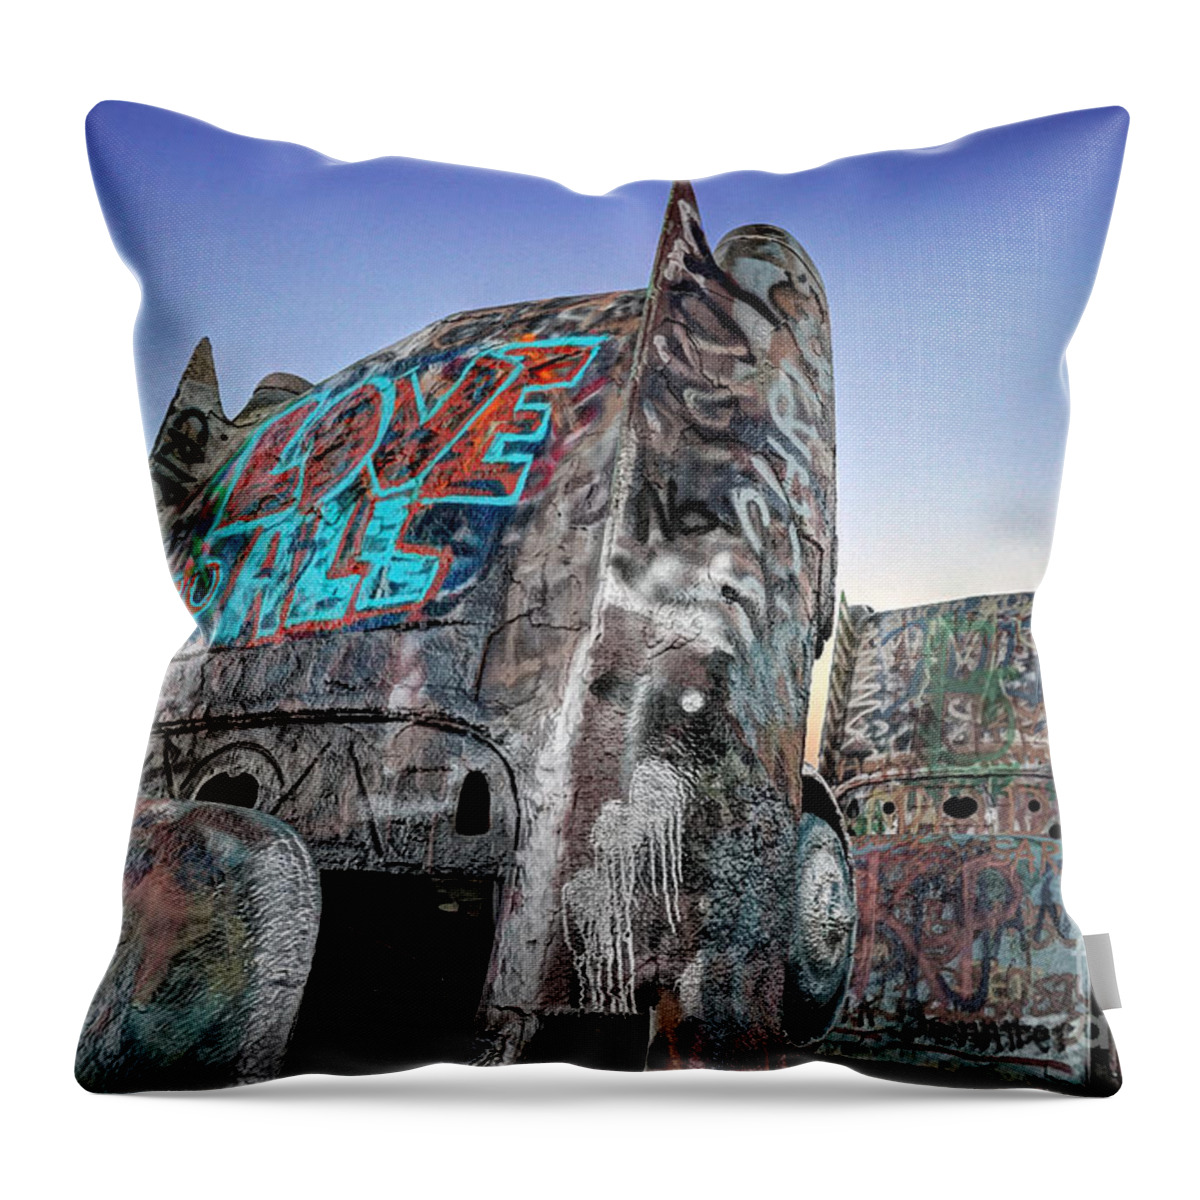 Graffiti Throw Pillow featuring the photograph Love To All Cadillac Ranch by Martin Konopacki